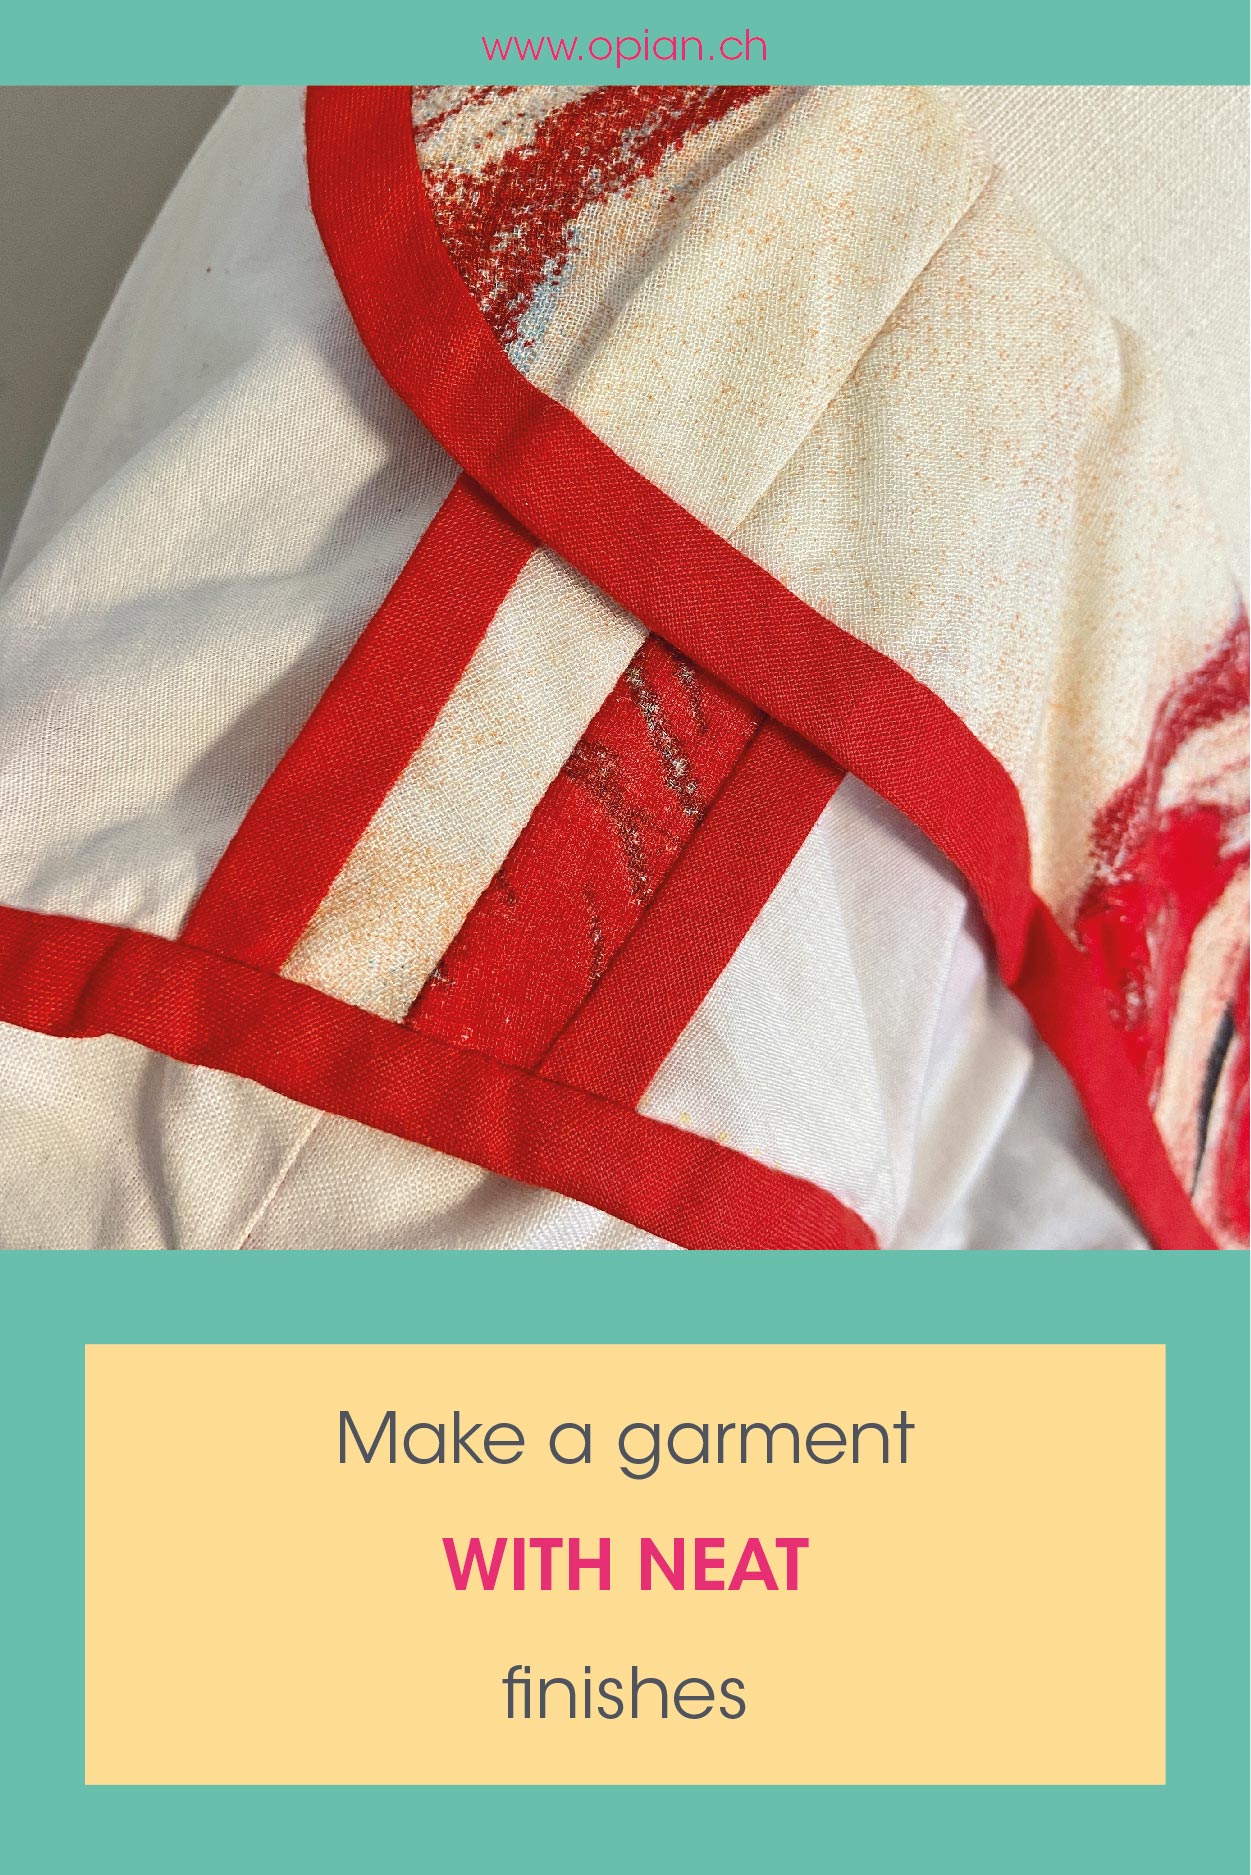 Make_a_garment_with_neat_finishes